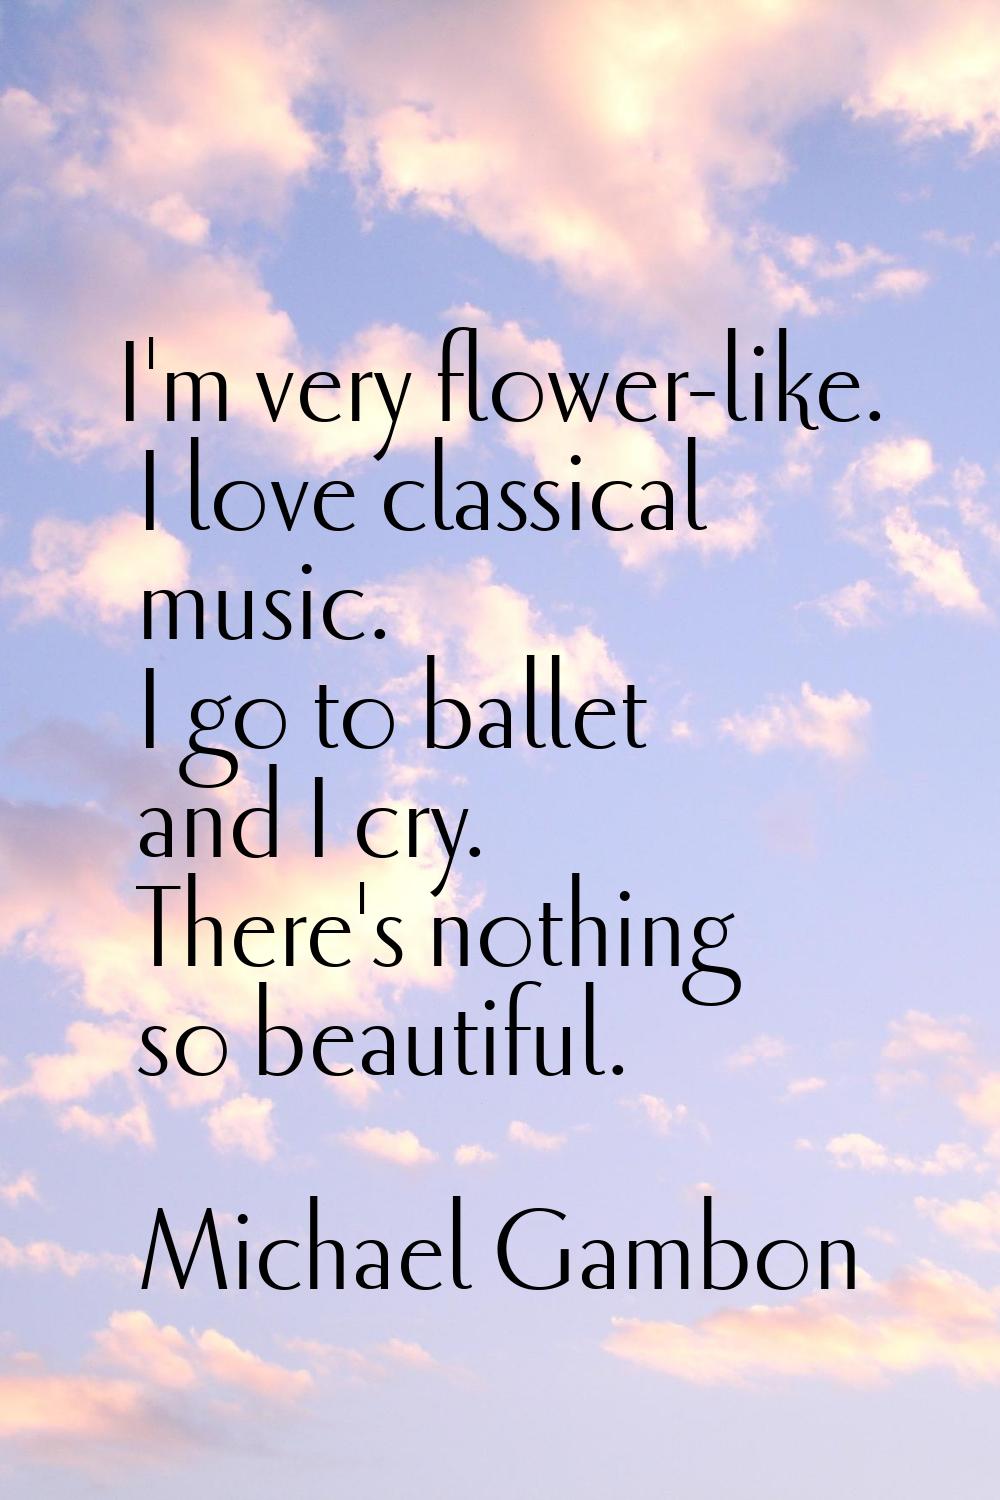 I'm very flower-like. I love classical music. I go to ballet and I cry. There's nothing so beautifu